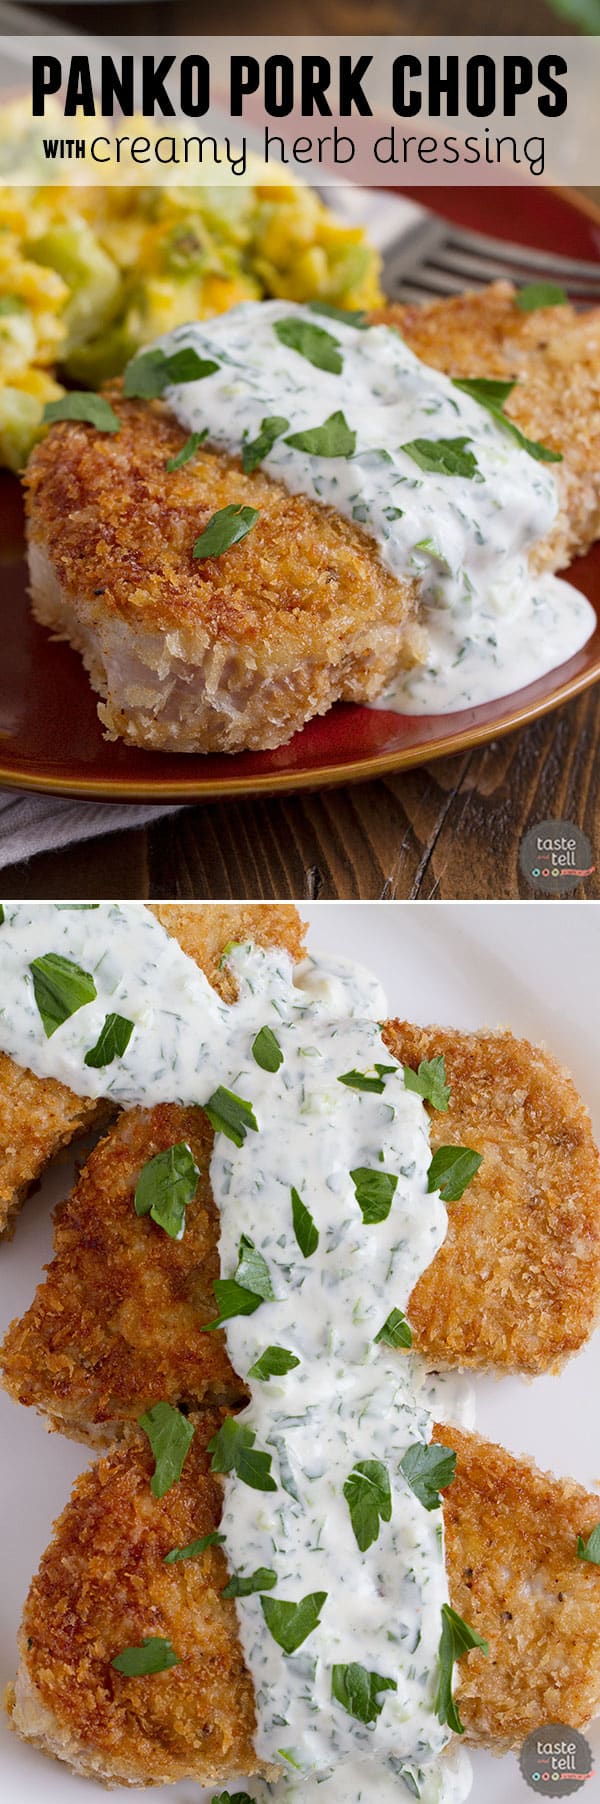 crumbs panko with baked chicken bread recipe for thighs chops baked crusted pork panko